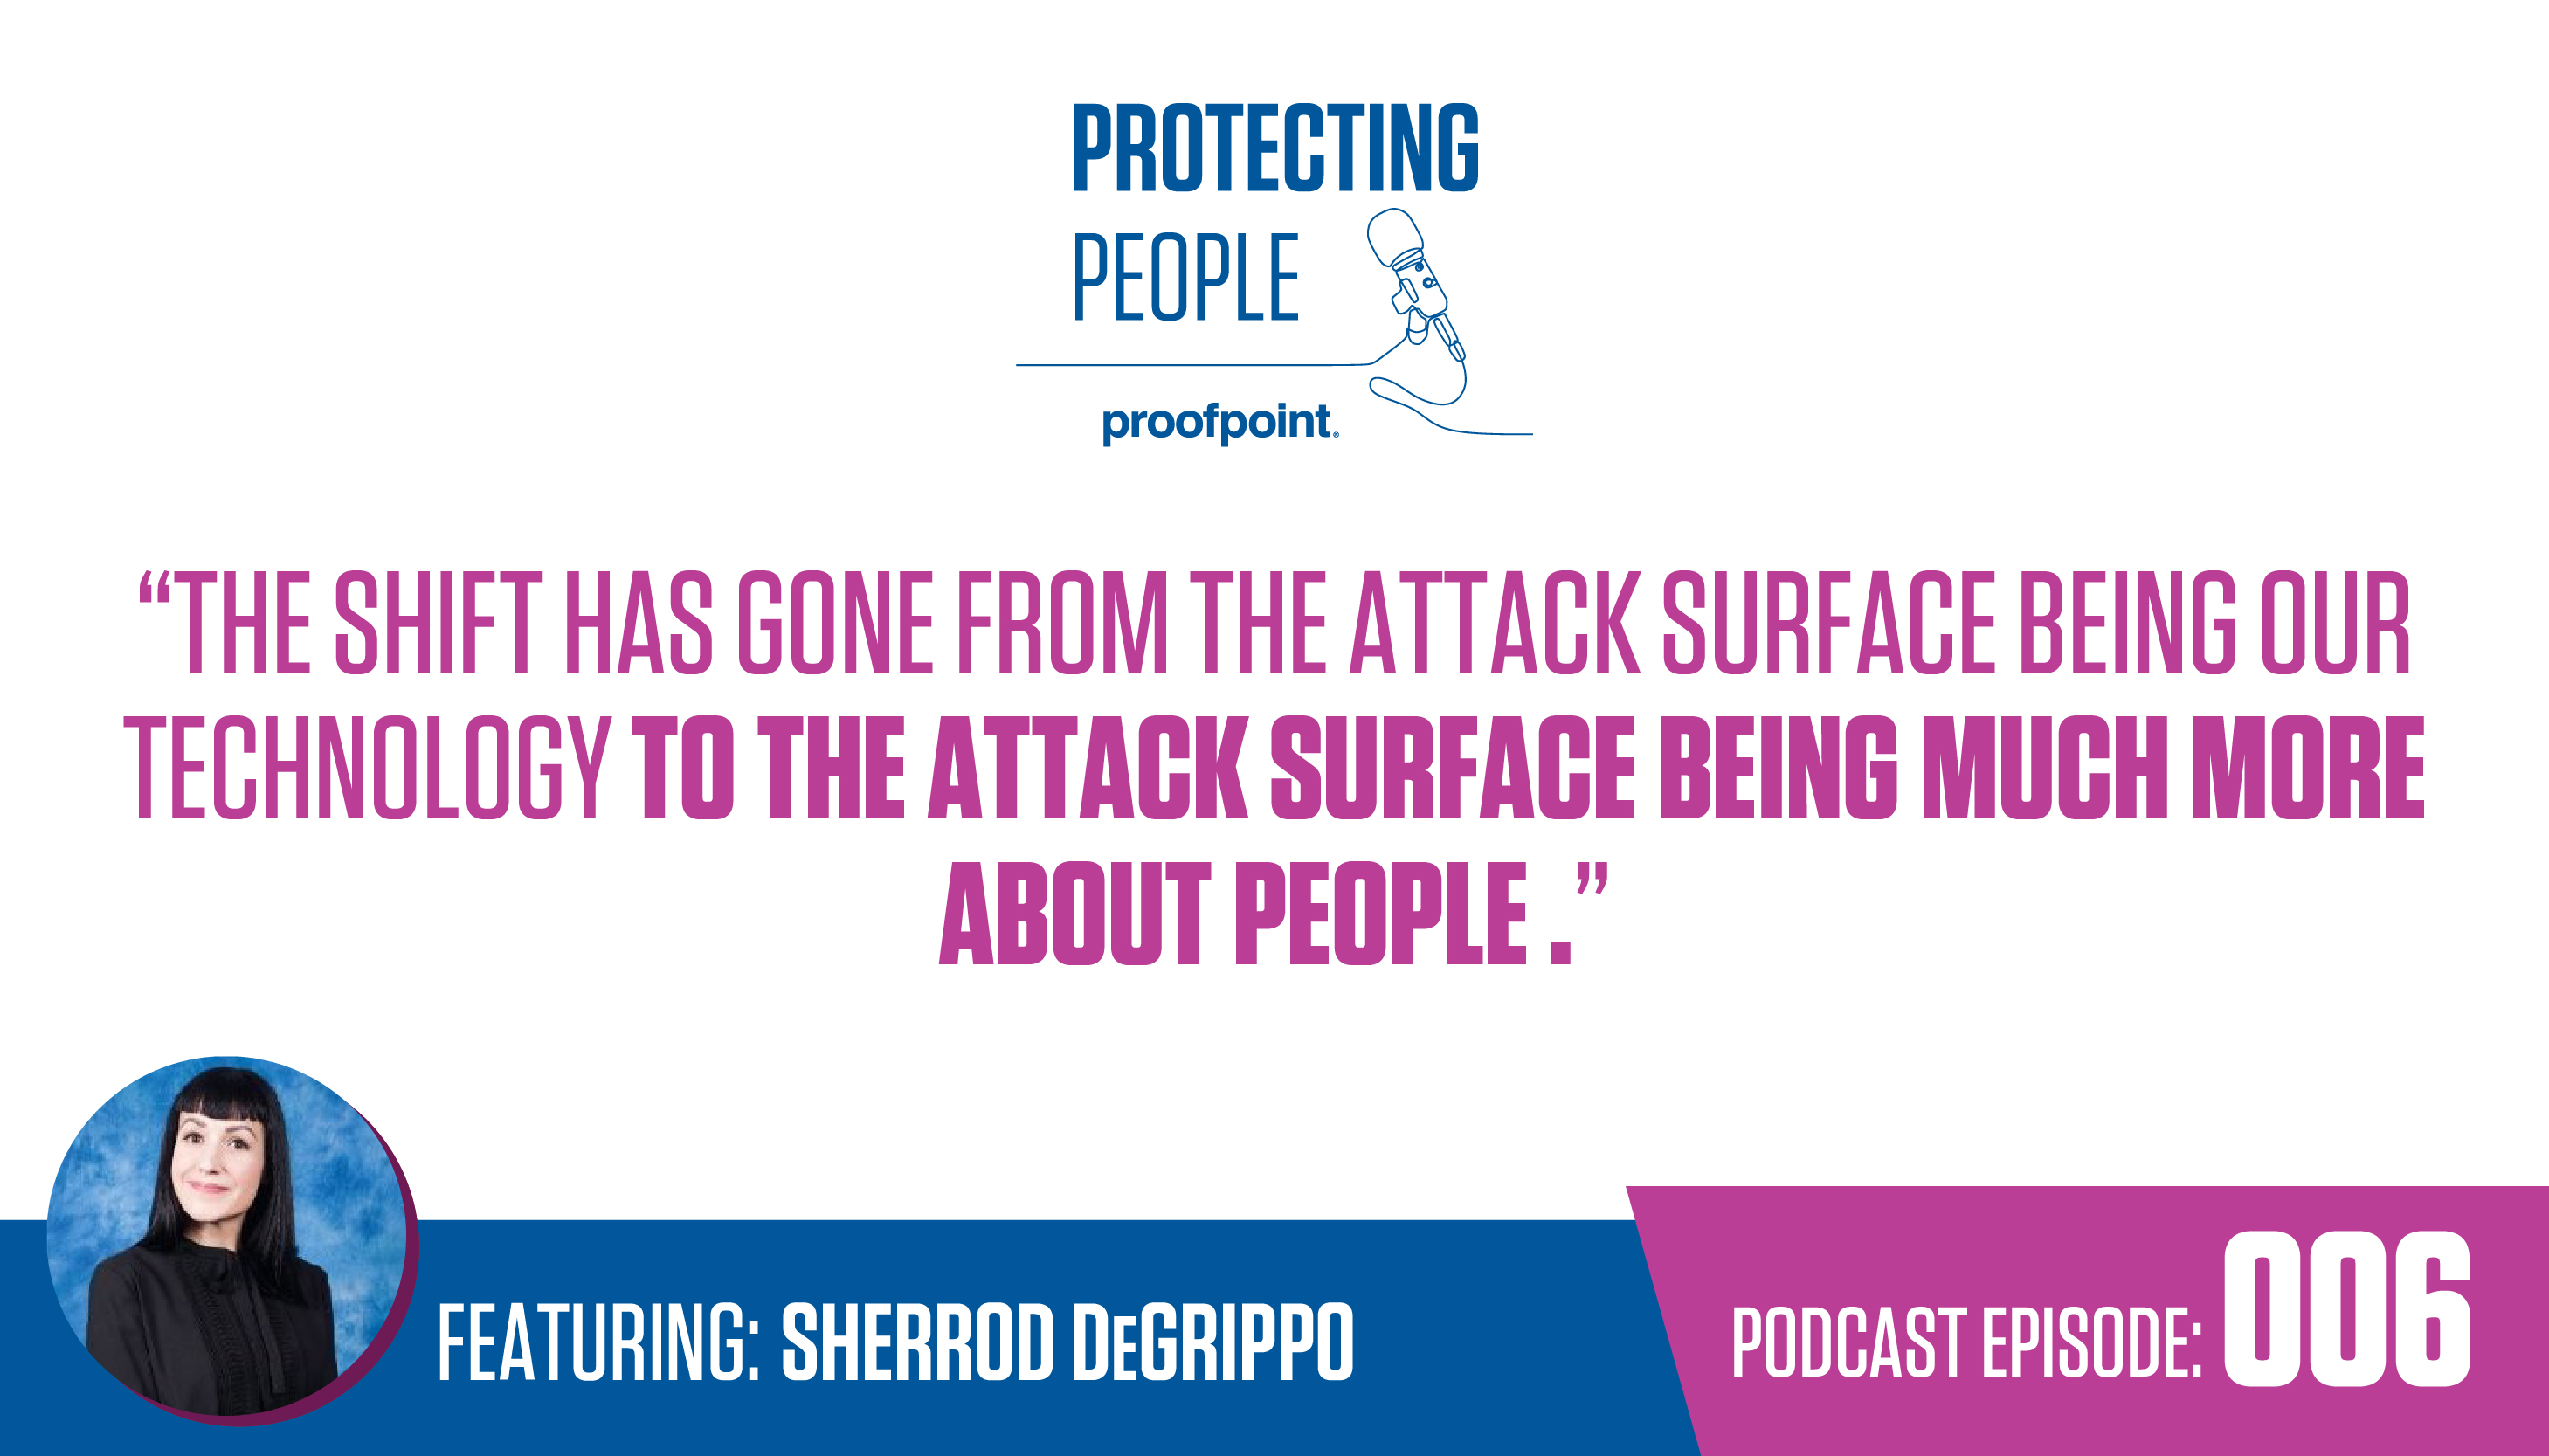 Protecting people podcast episode featuring Sherrod DeGrippo